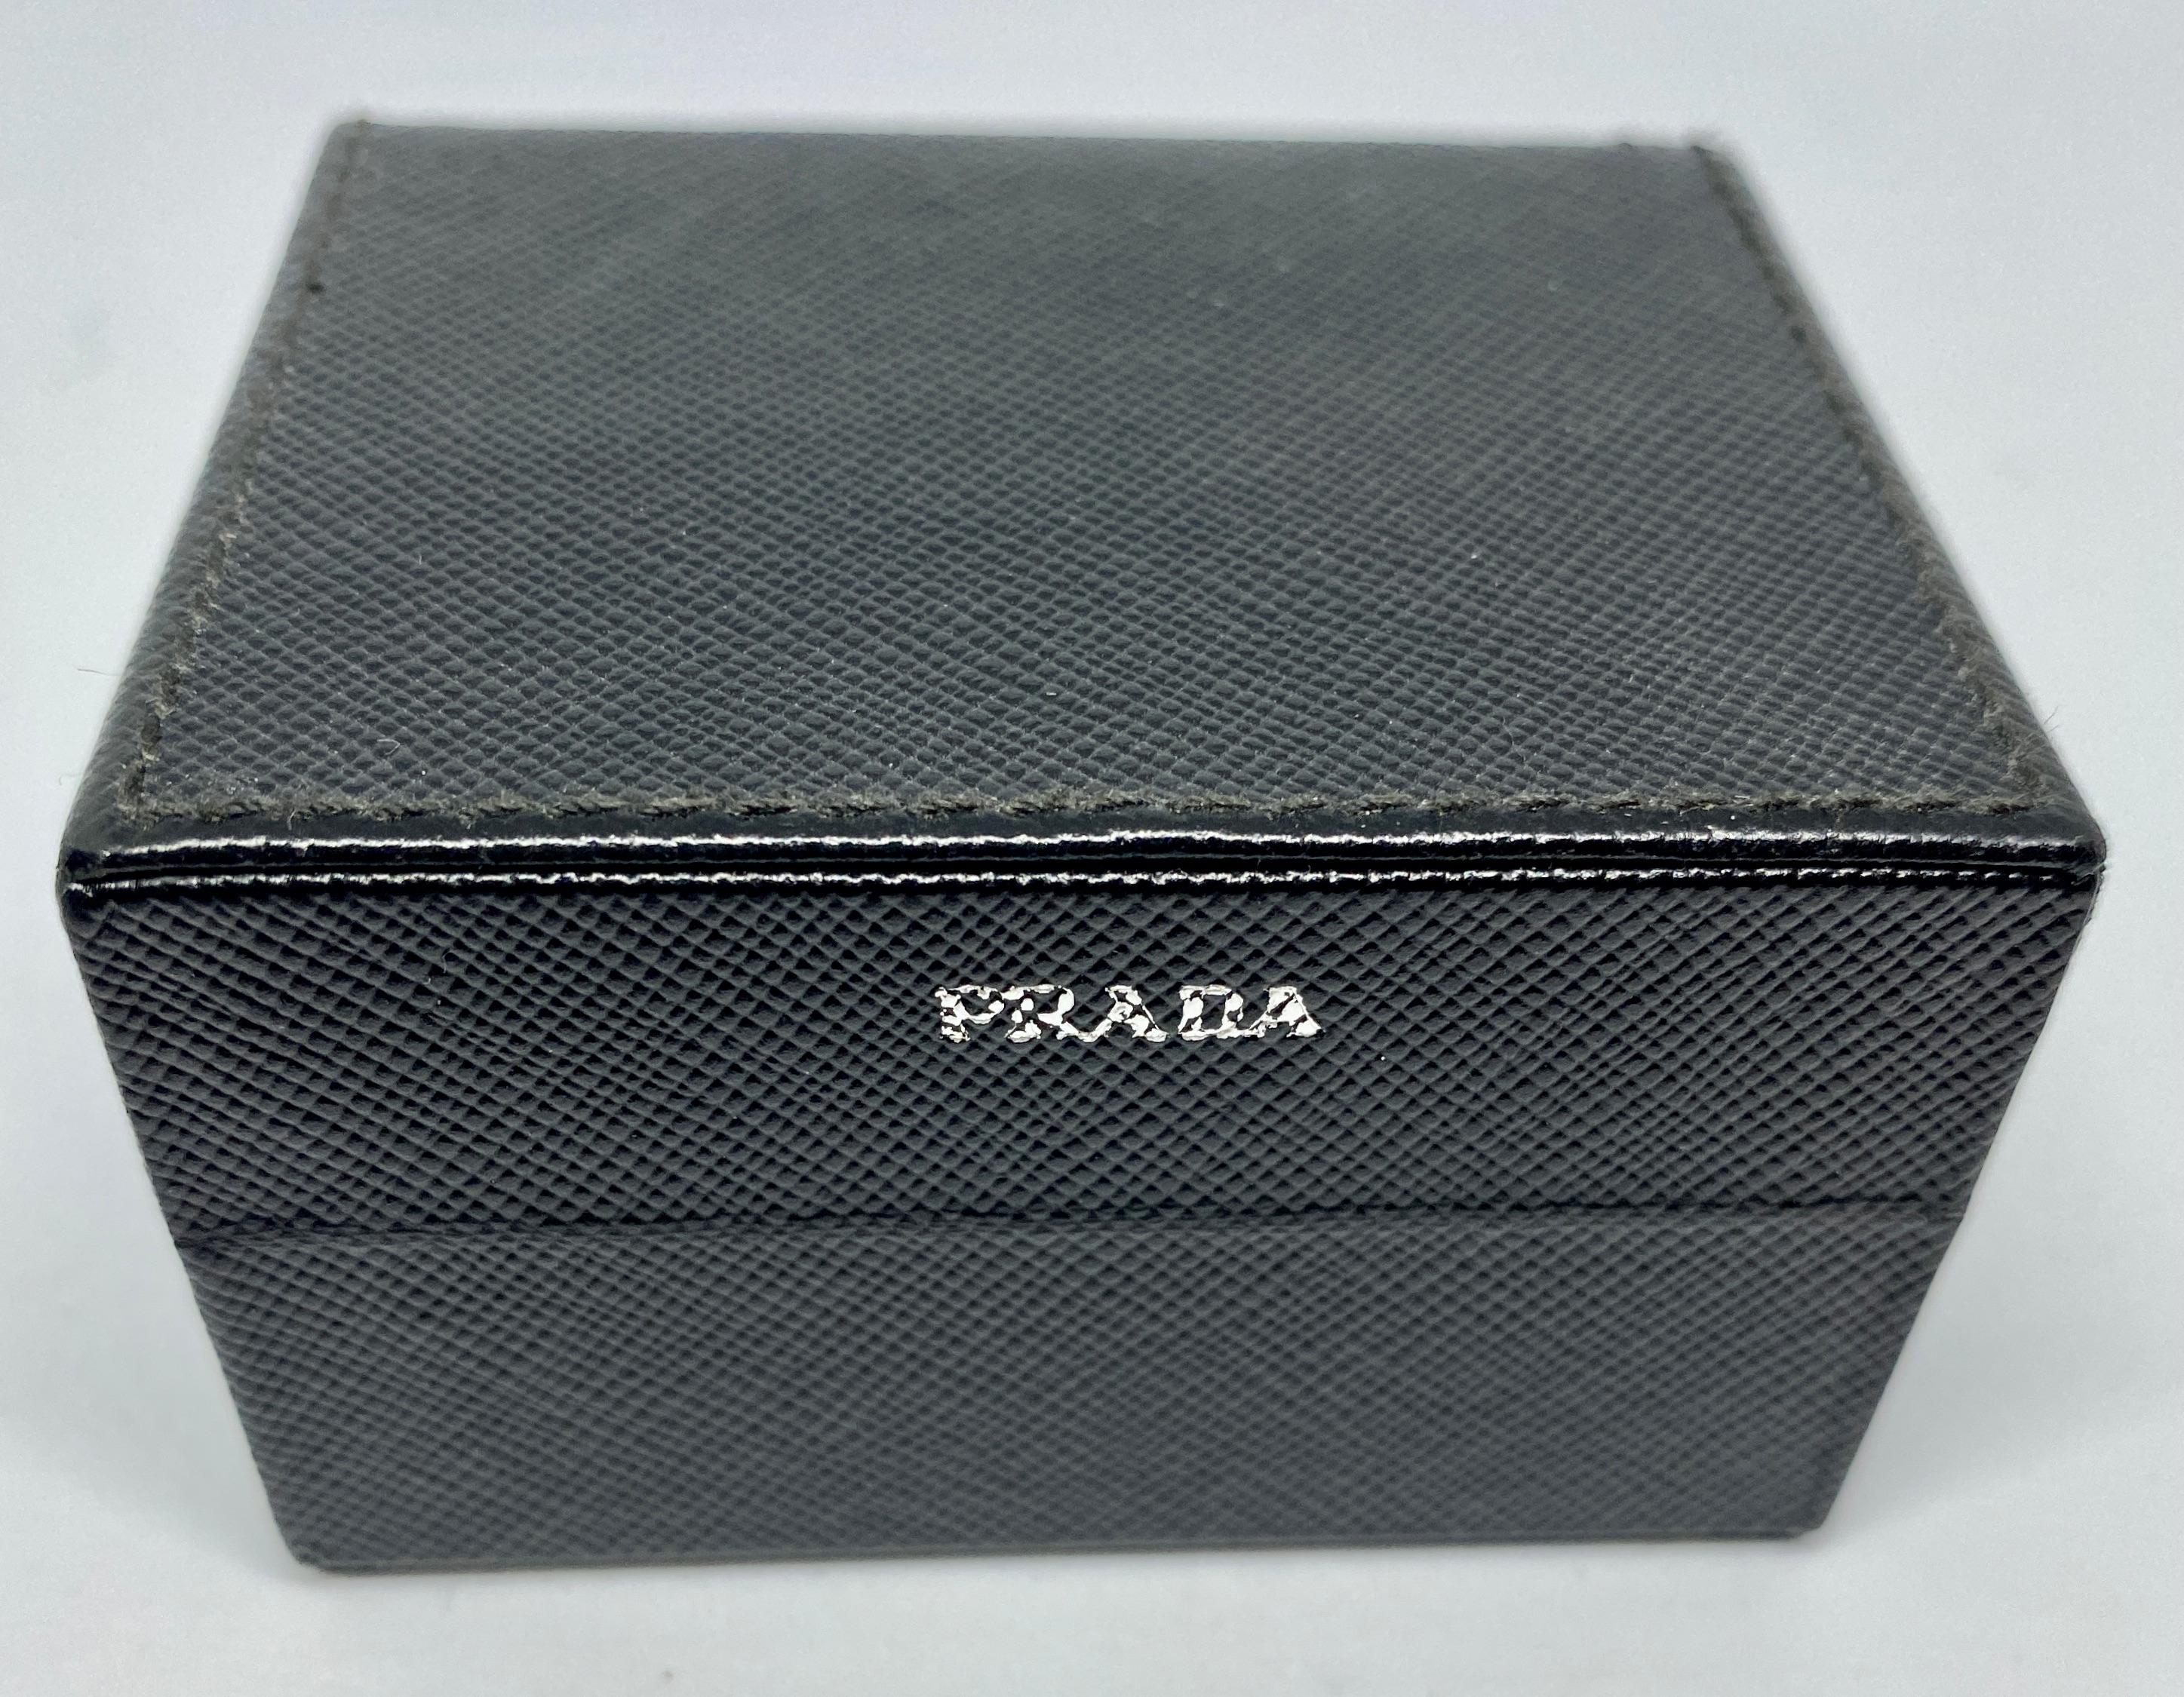 Prada Cufflinks in Sterling Silver with Multicolored Thread In Good Condition For Sale In San Rafael, CA